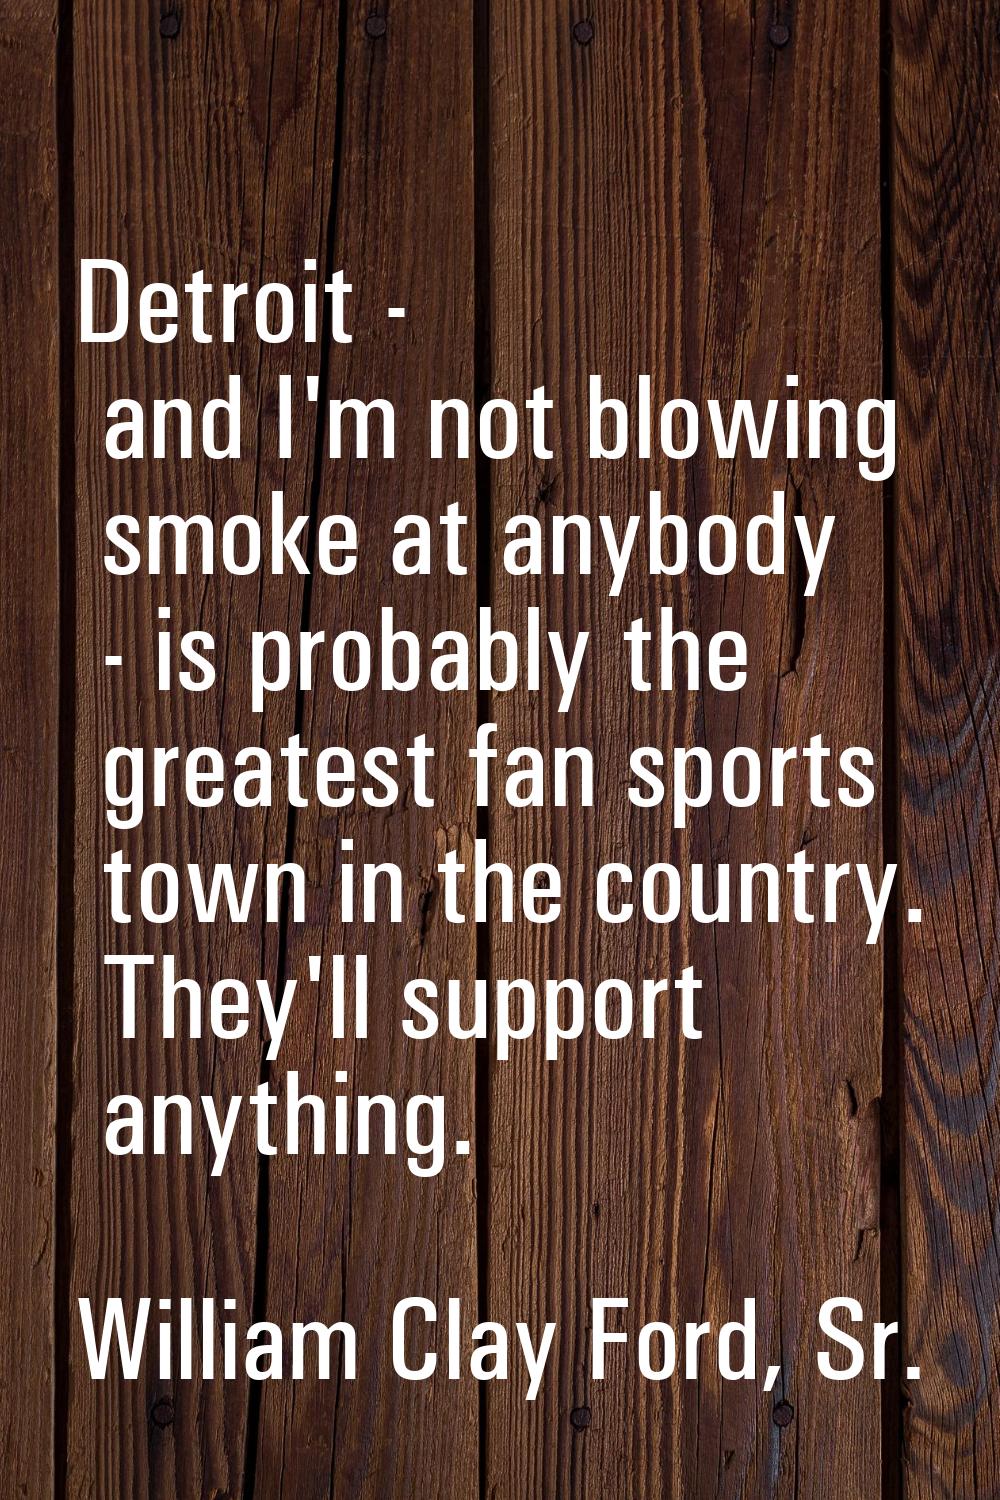 Detroit - and I'm not blowing smoke at anybody - is probably the greatest fan sports town in the co